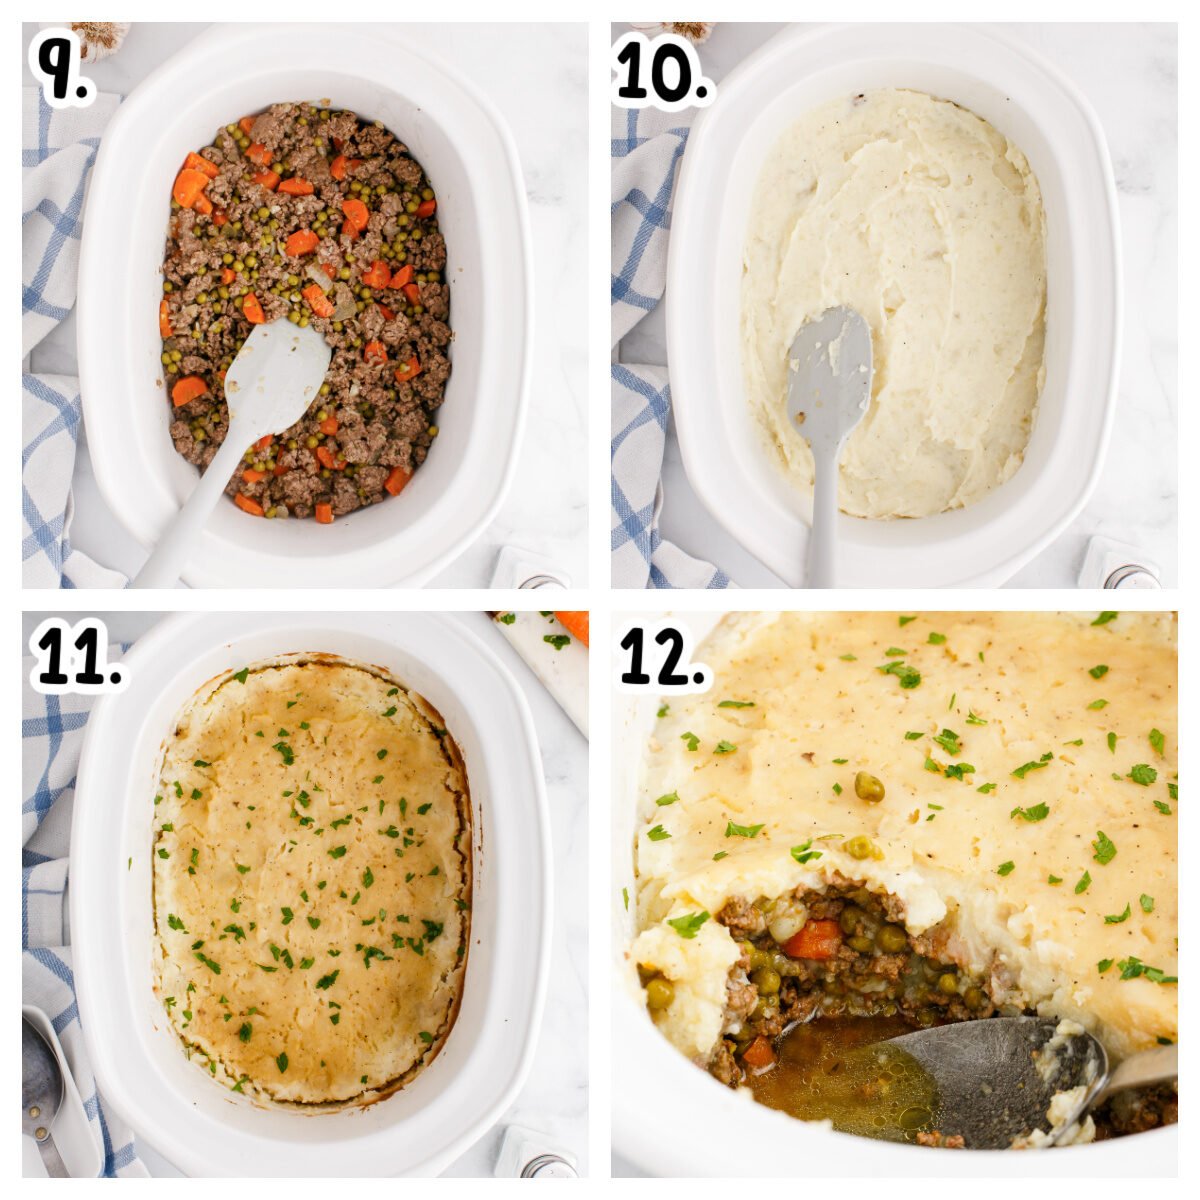 4 images showing how to assemble shepherd's pie in the crockpot.